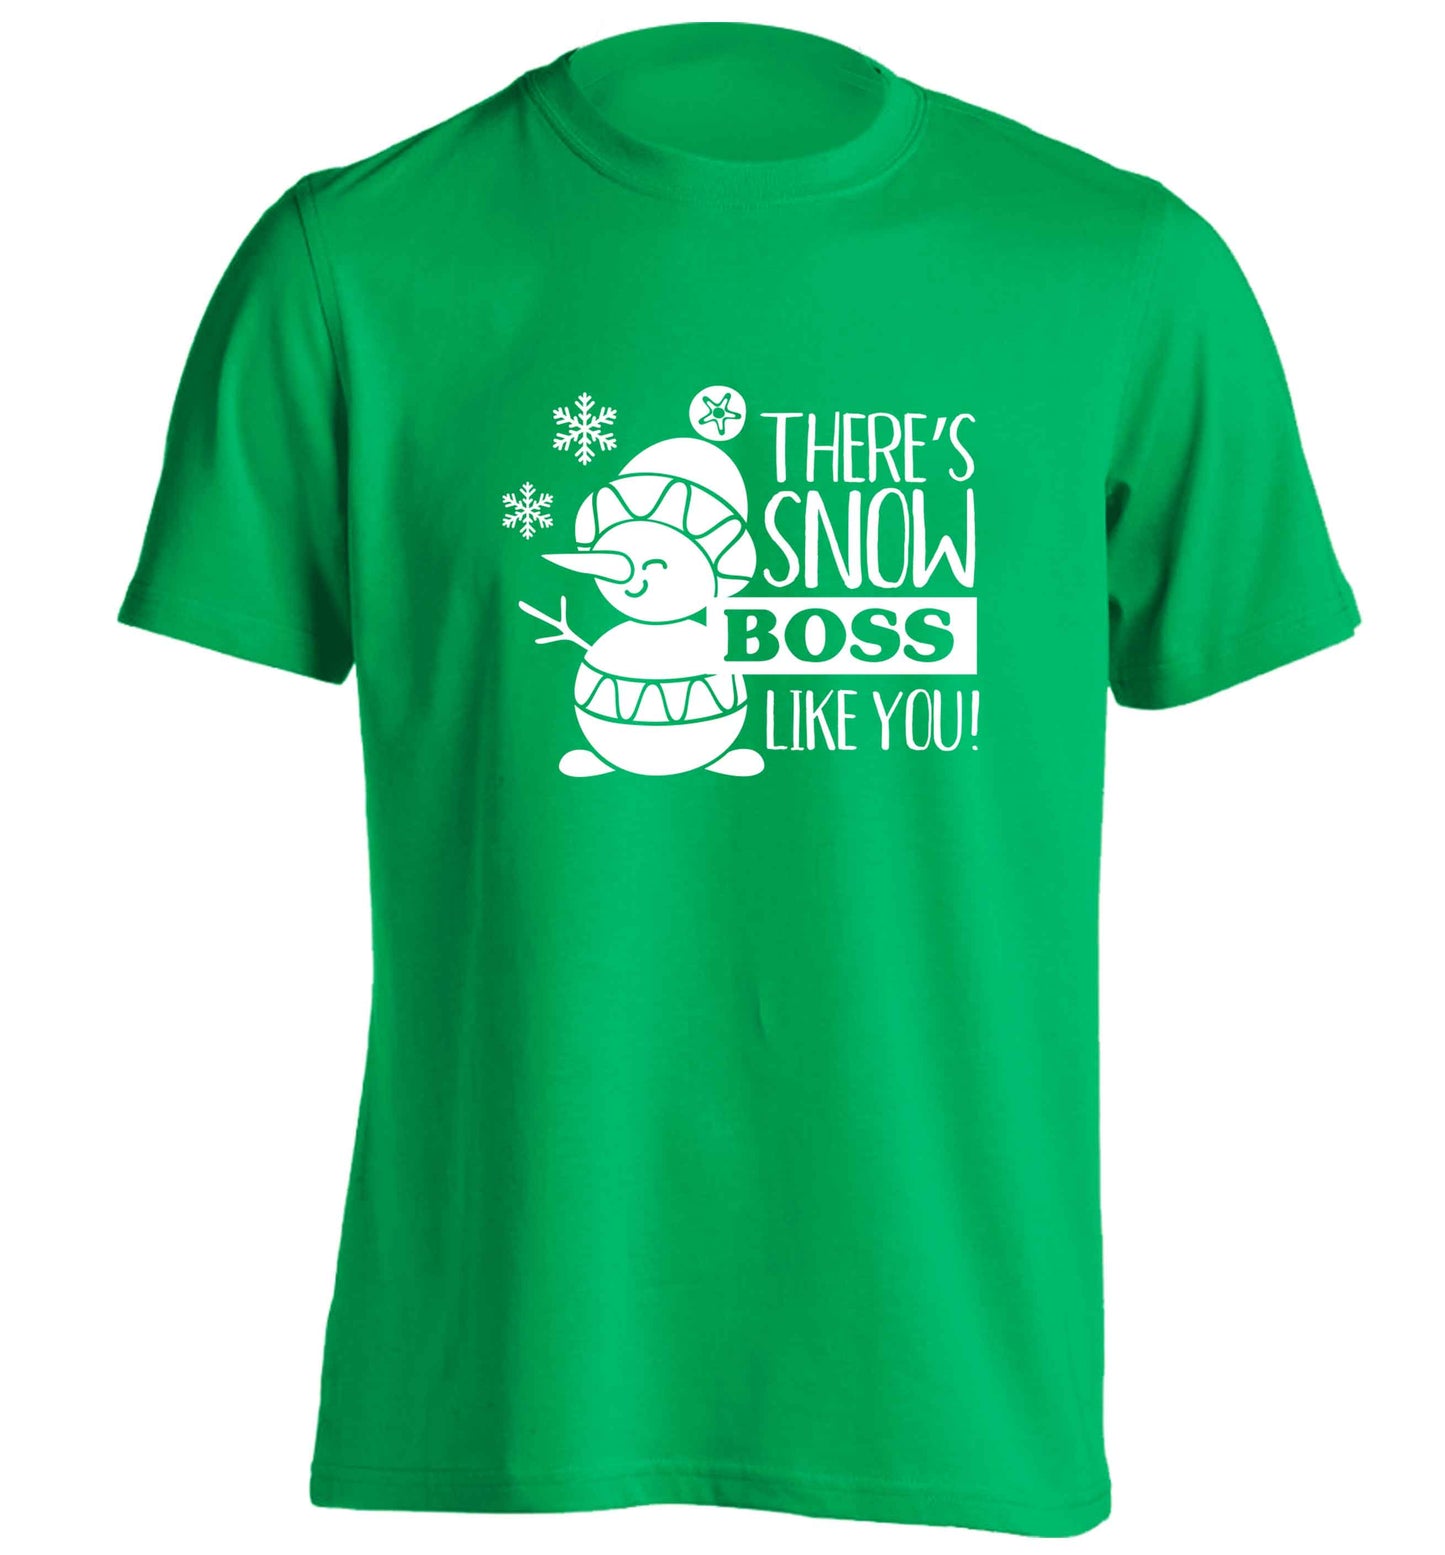 There's snow boss like you adults unisex green Tshirt 2XL